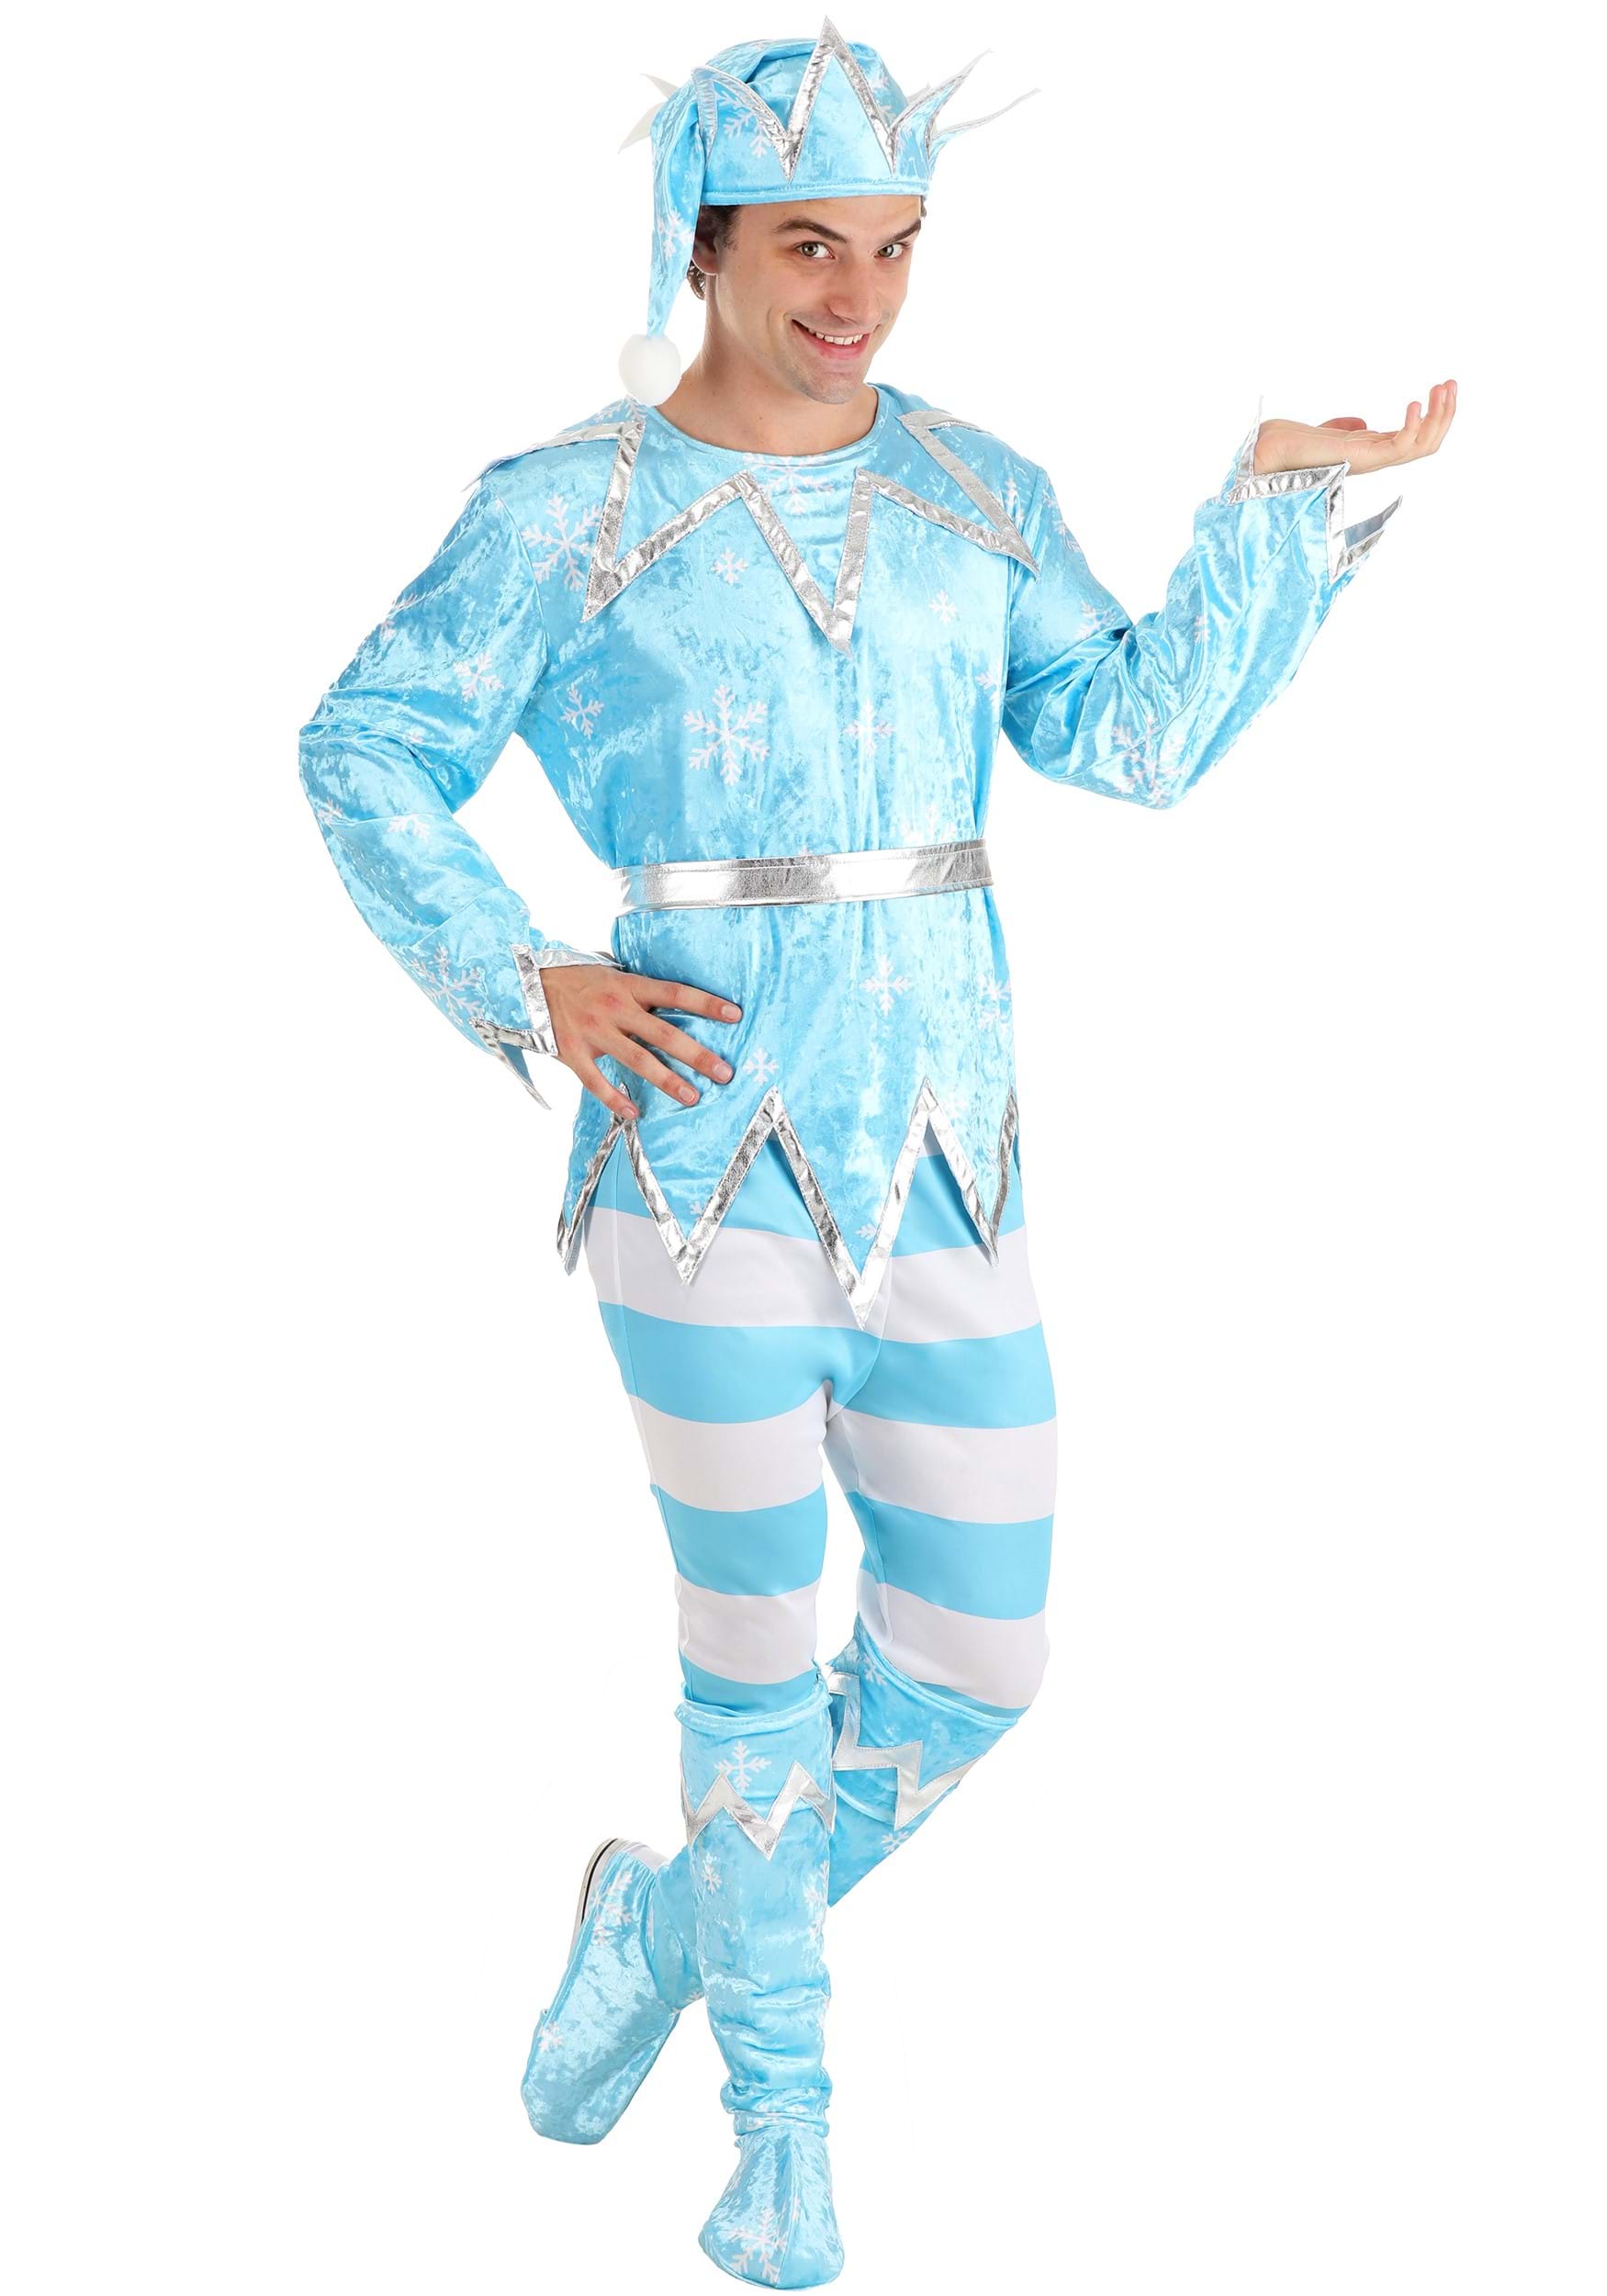 Image of Adult Deluxe Jack Frost Costume ID FUN4353AD-M